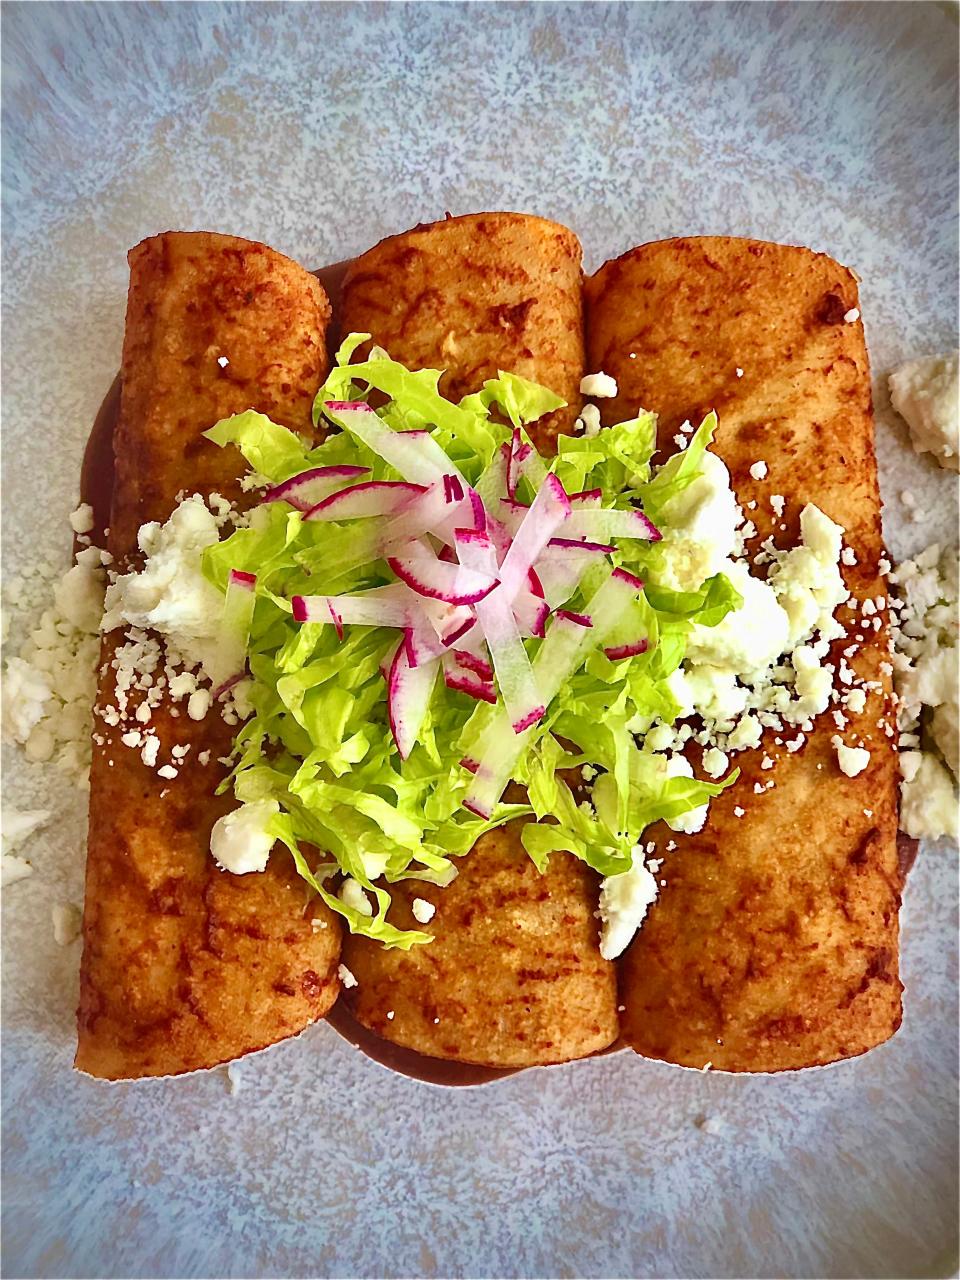 Veggie Enchiladas with Corn, Zucchini, Chile Sauce, Red Beans and Feta from the Carlos Miguel restaurant pop-up from Memphis chef Charles Willoughby.